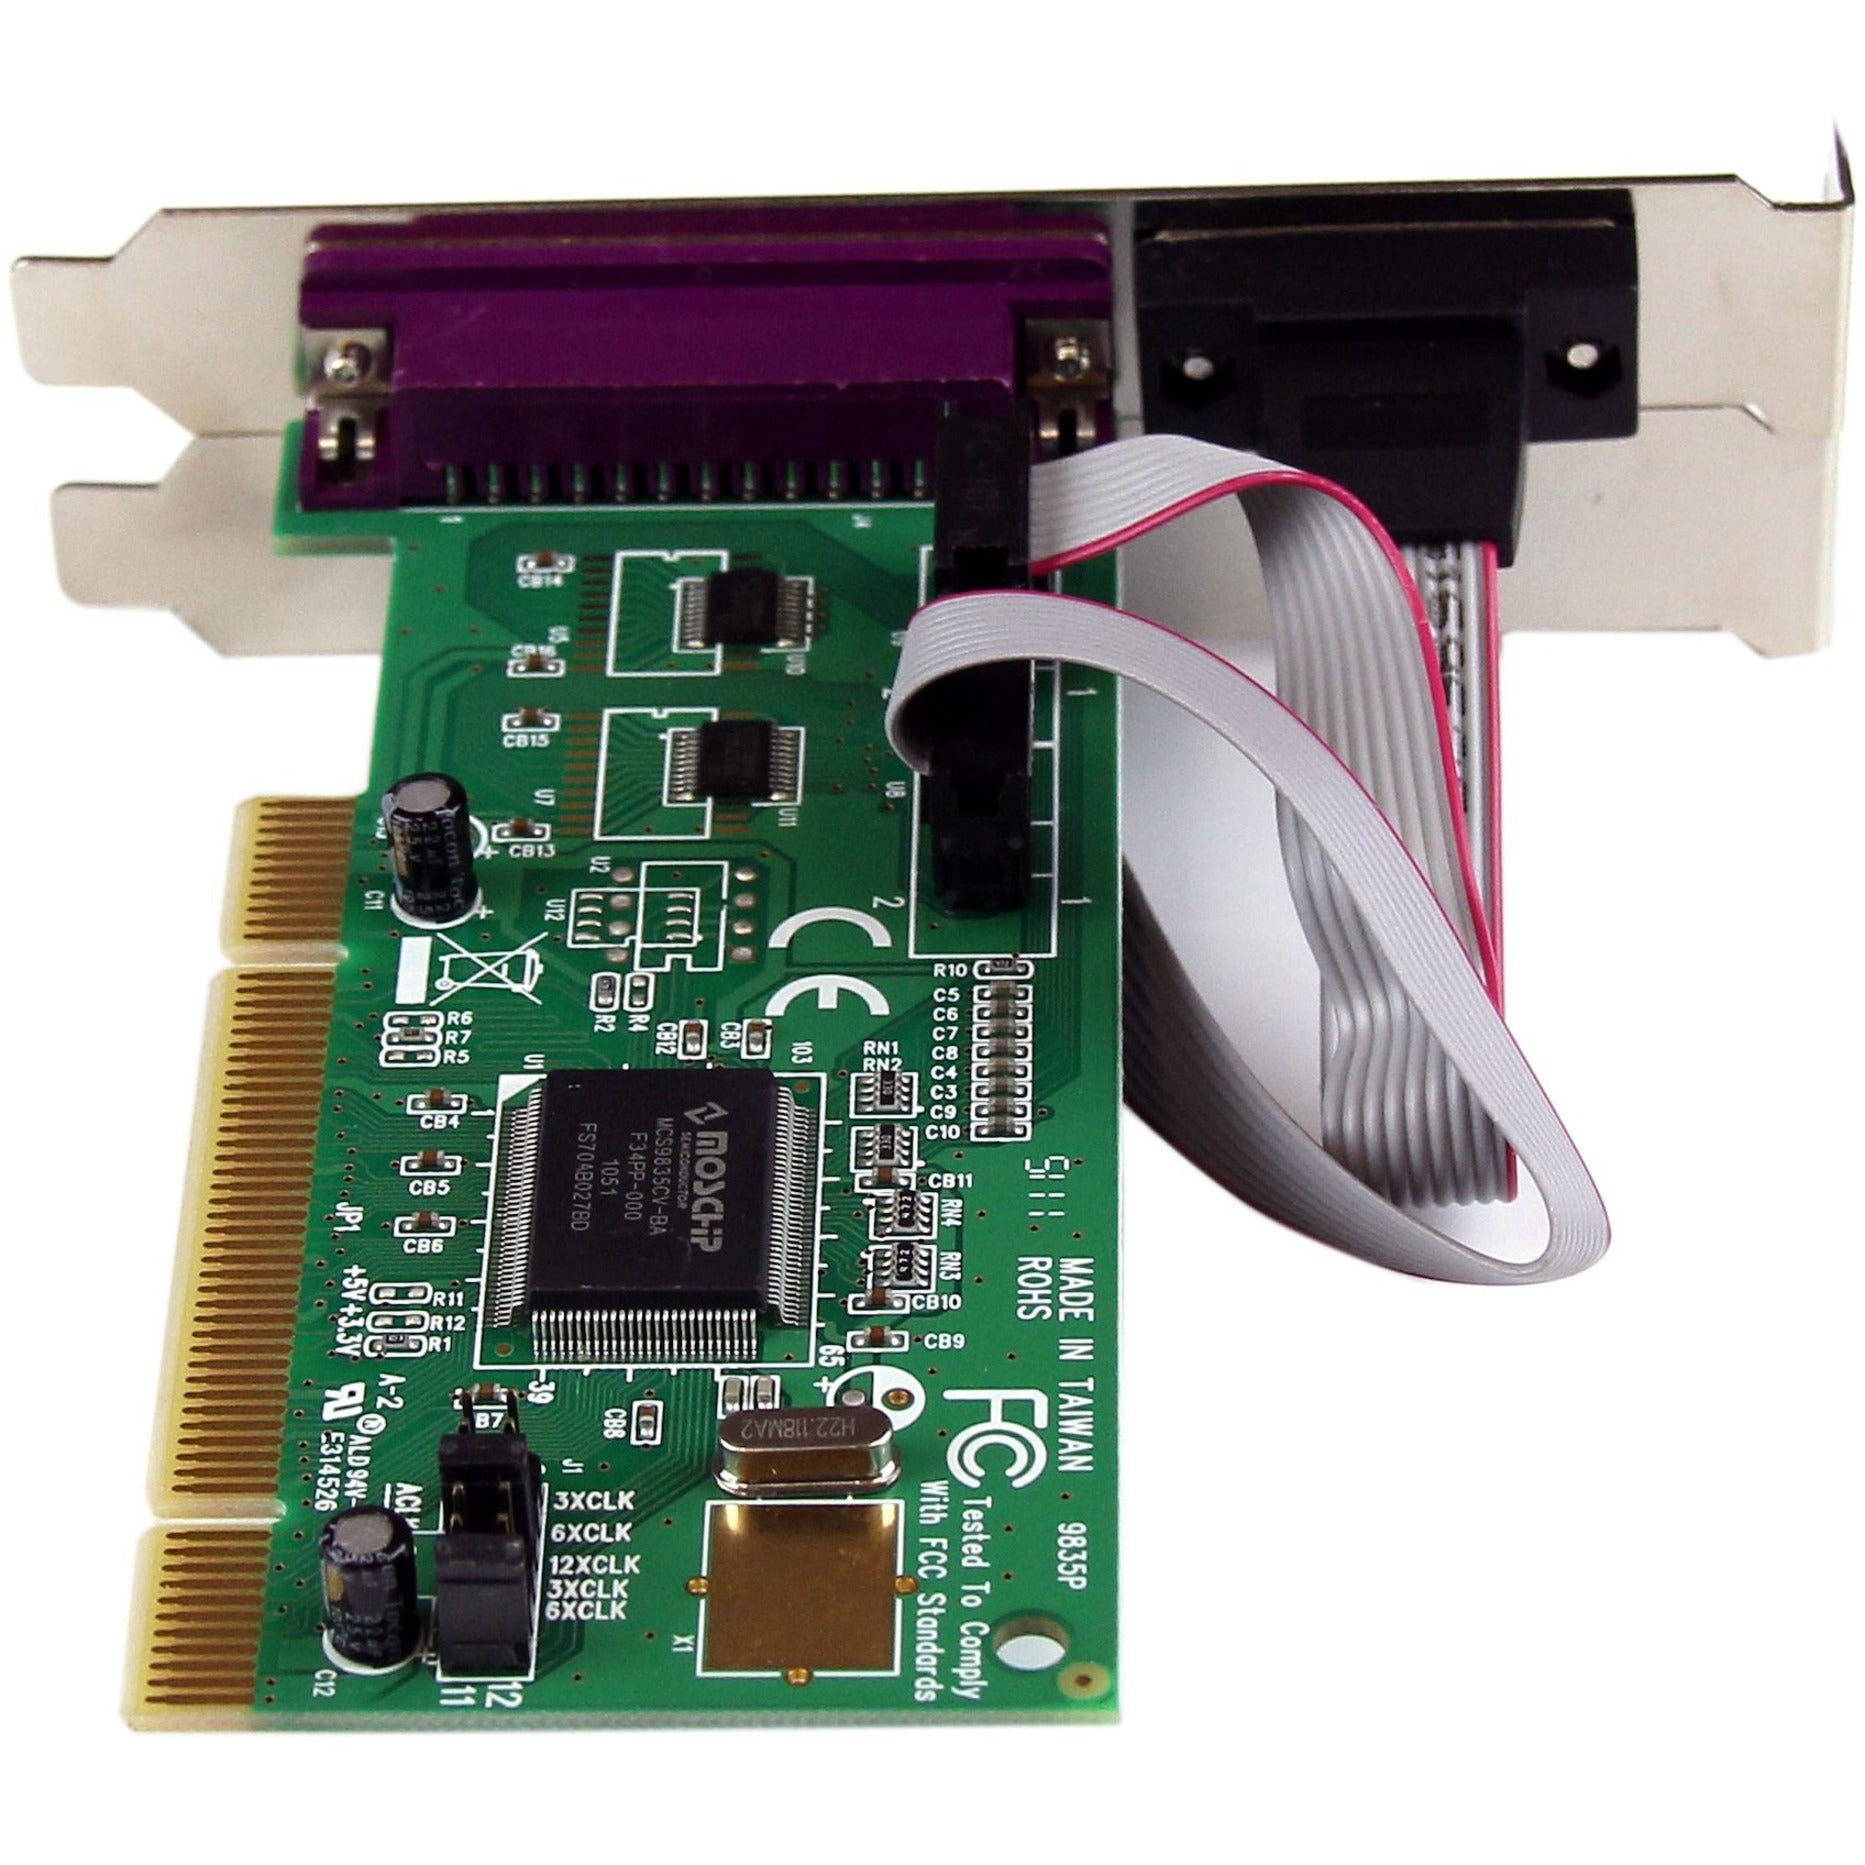 StarTech.com PCI2S1P 2S1P PCI Serial Parallel Combo Card with 16550 UART, Up to 430kB/s Serial Port, EPP/ECP Parallel Mode